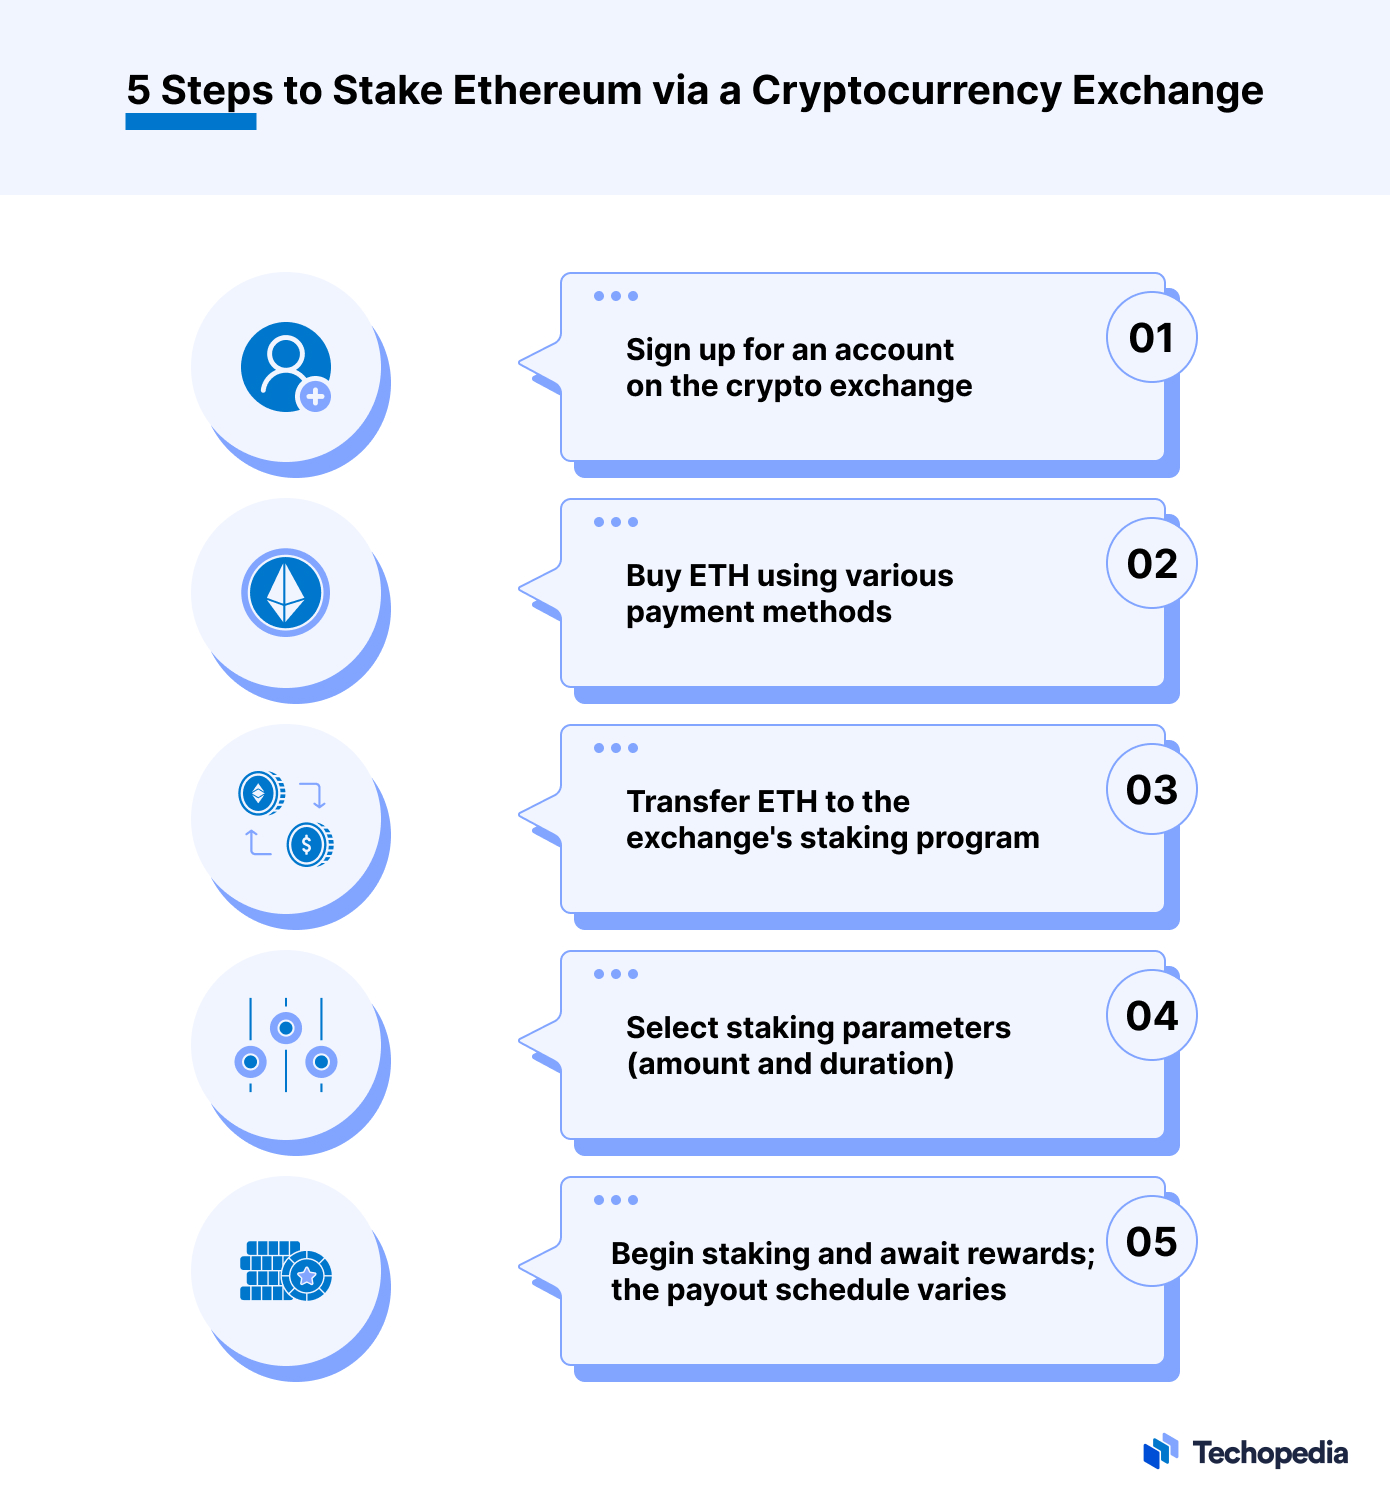 5 Steps to Stake Ethereum via Cryptocurrency Exchange